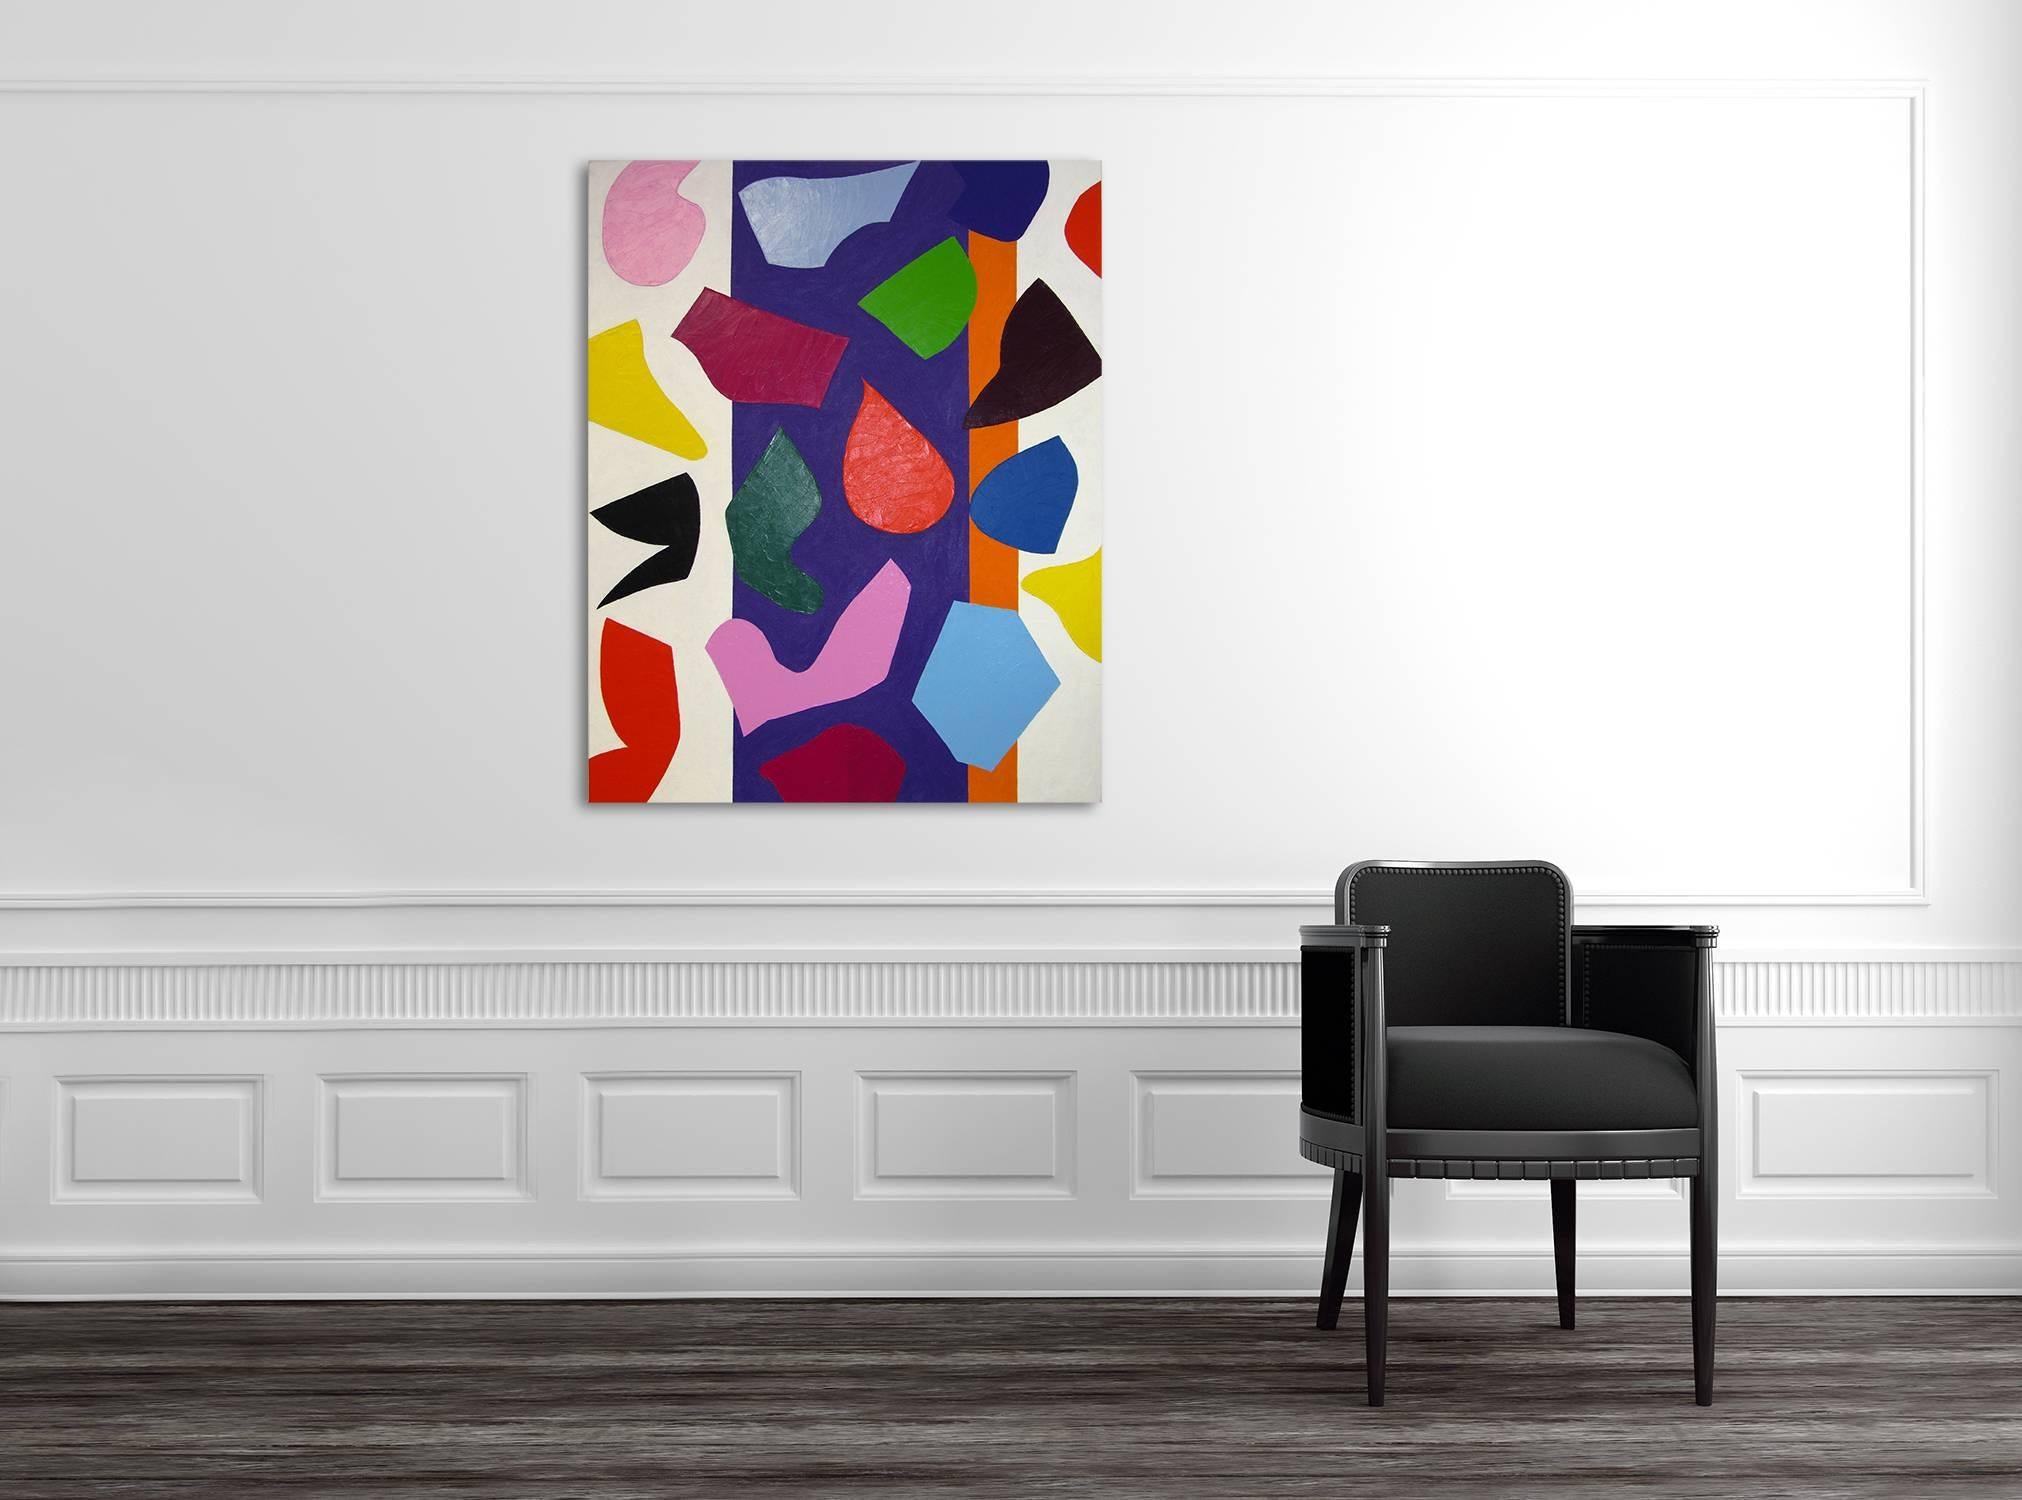 Aria in the area (Abstract painting) - Painting by Dana Gordon